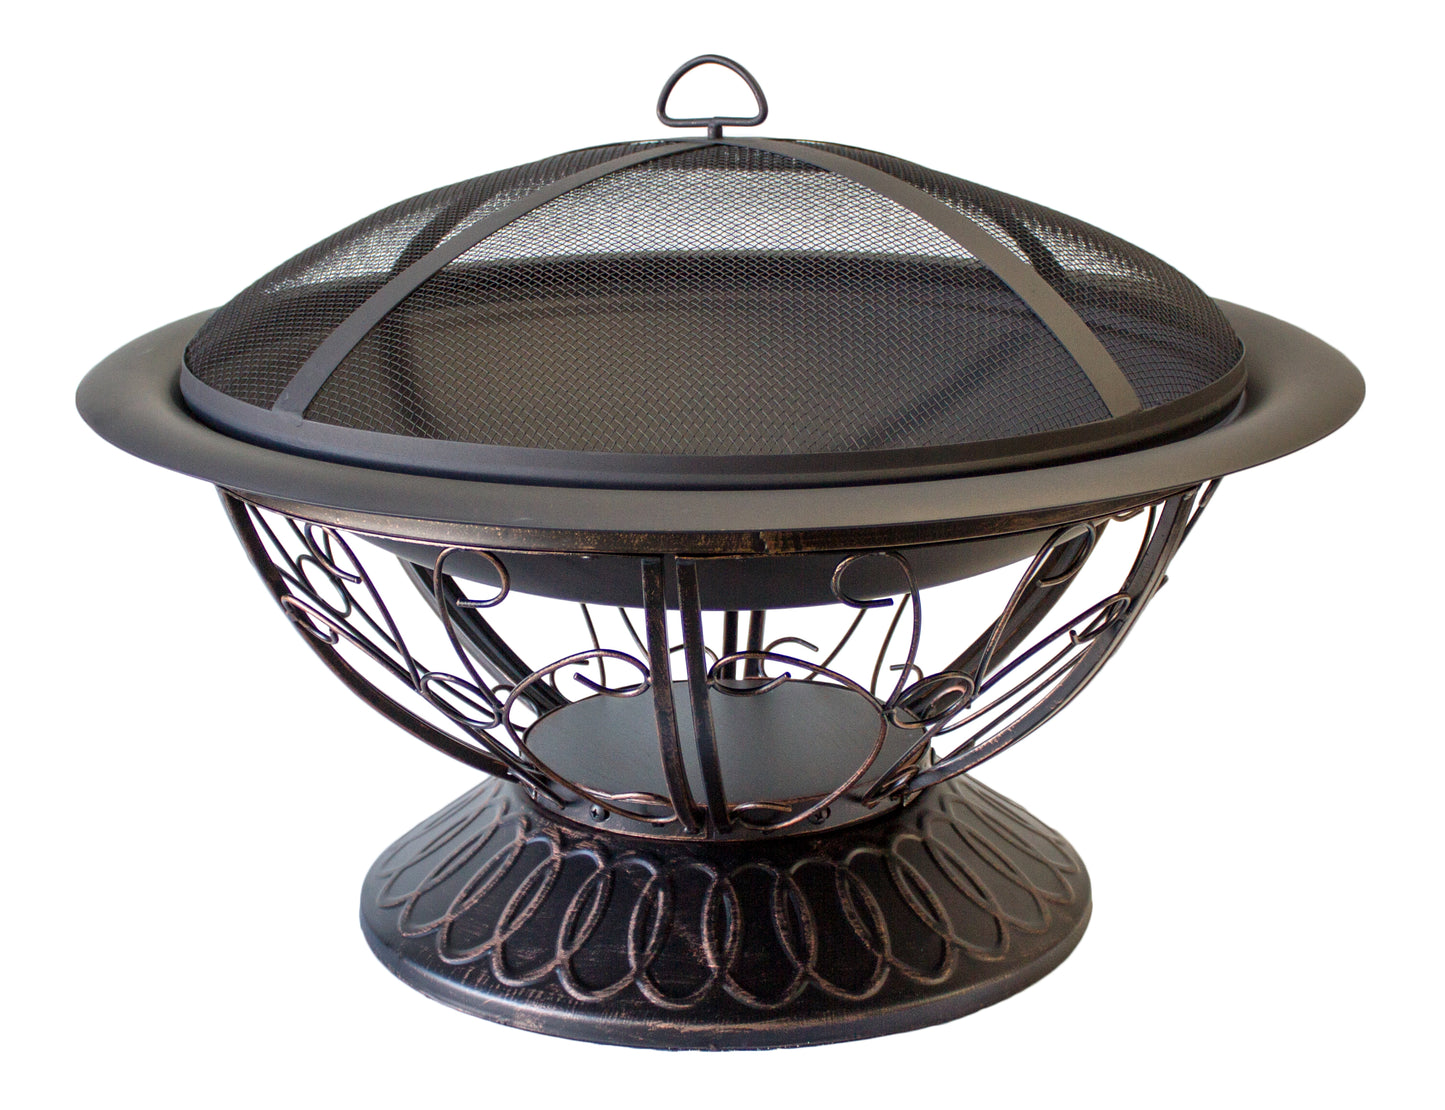 Outdoor Wood Burning Fire Pit With Scroll Design